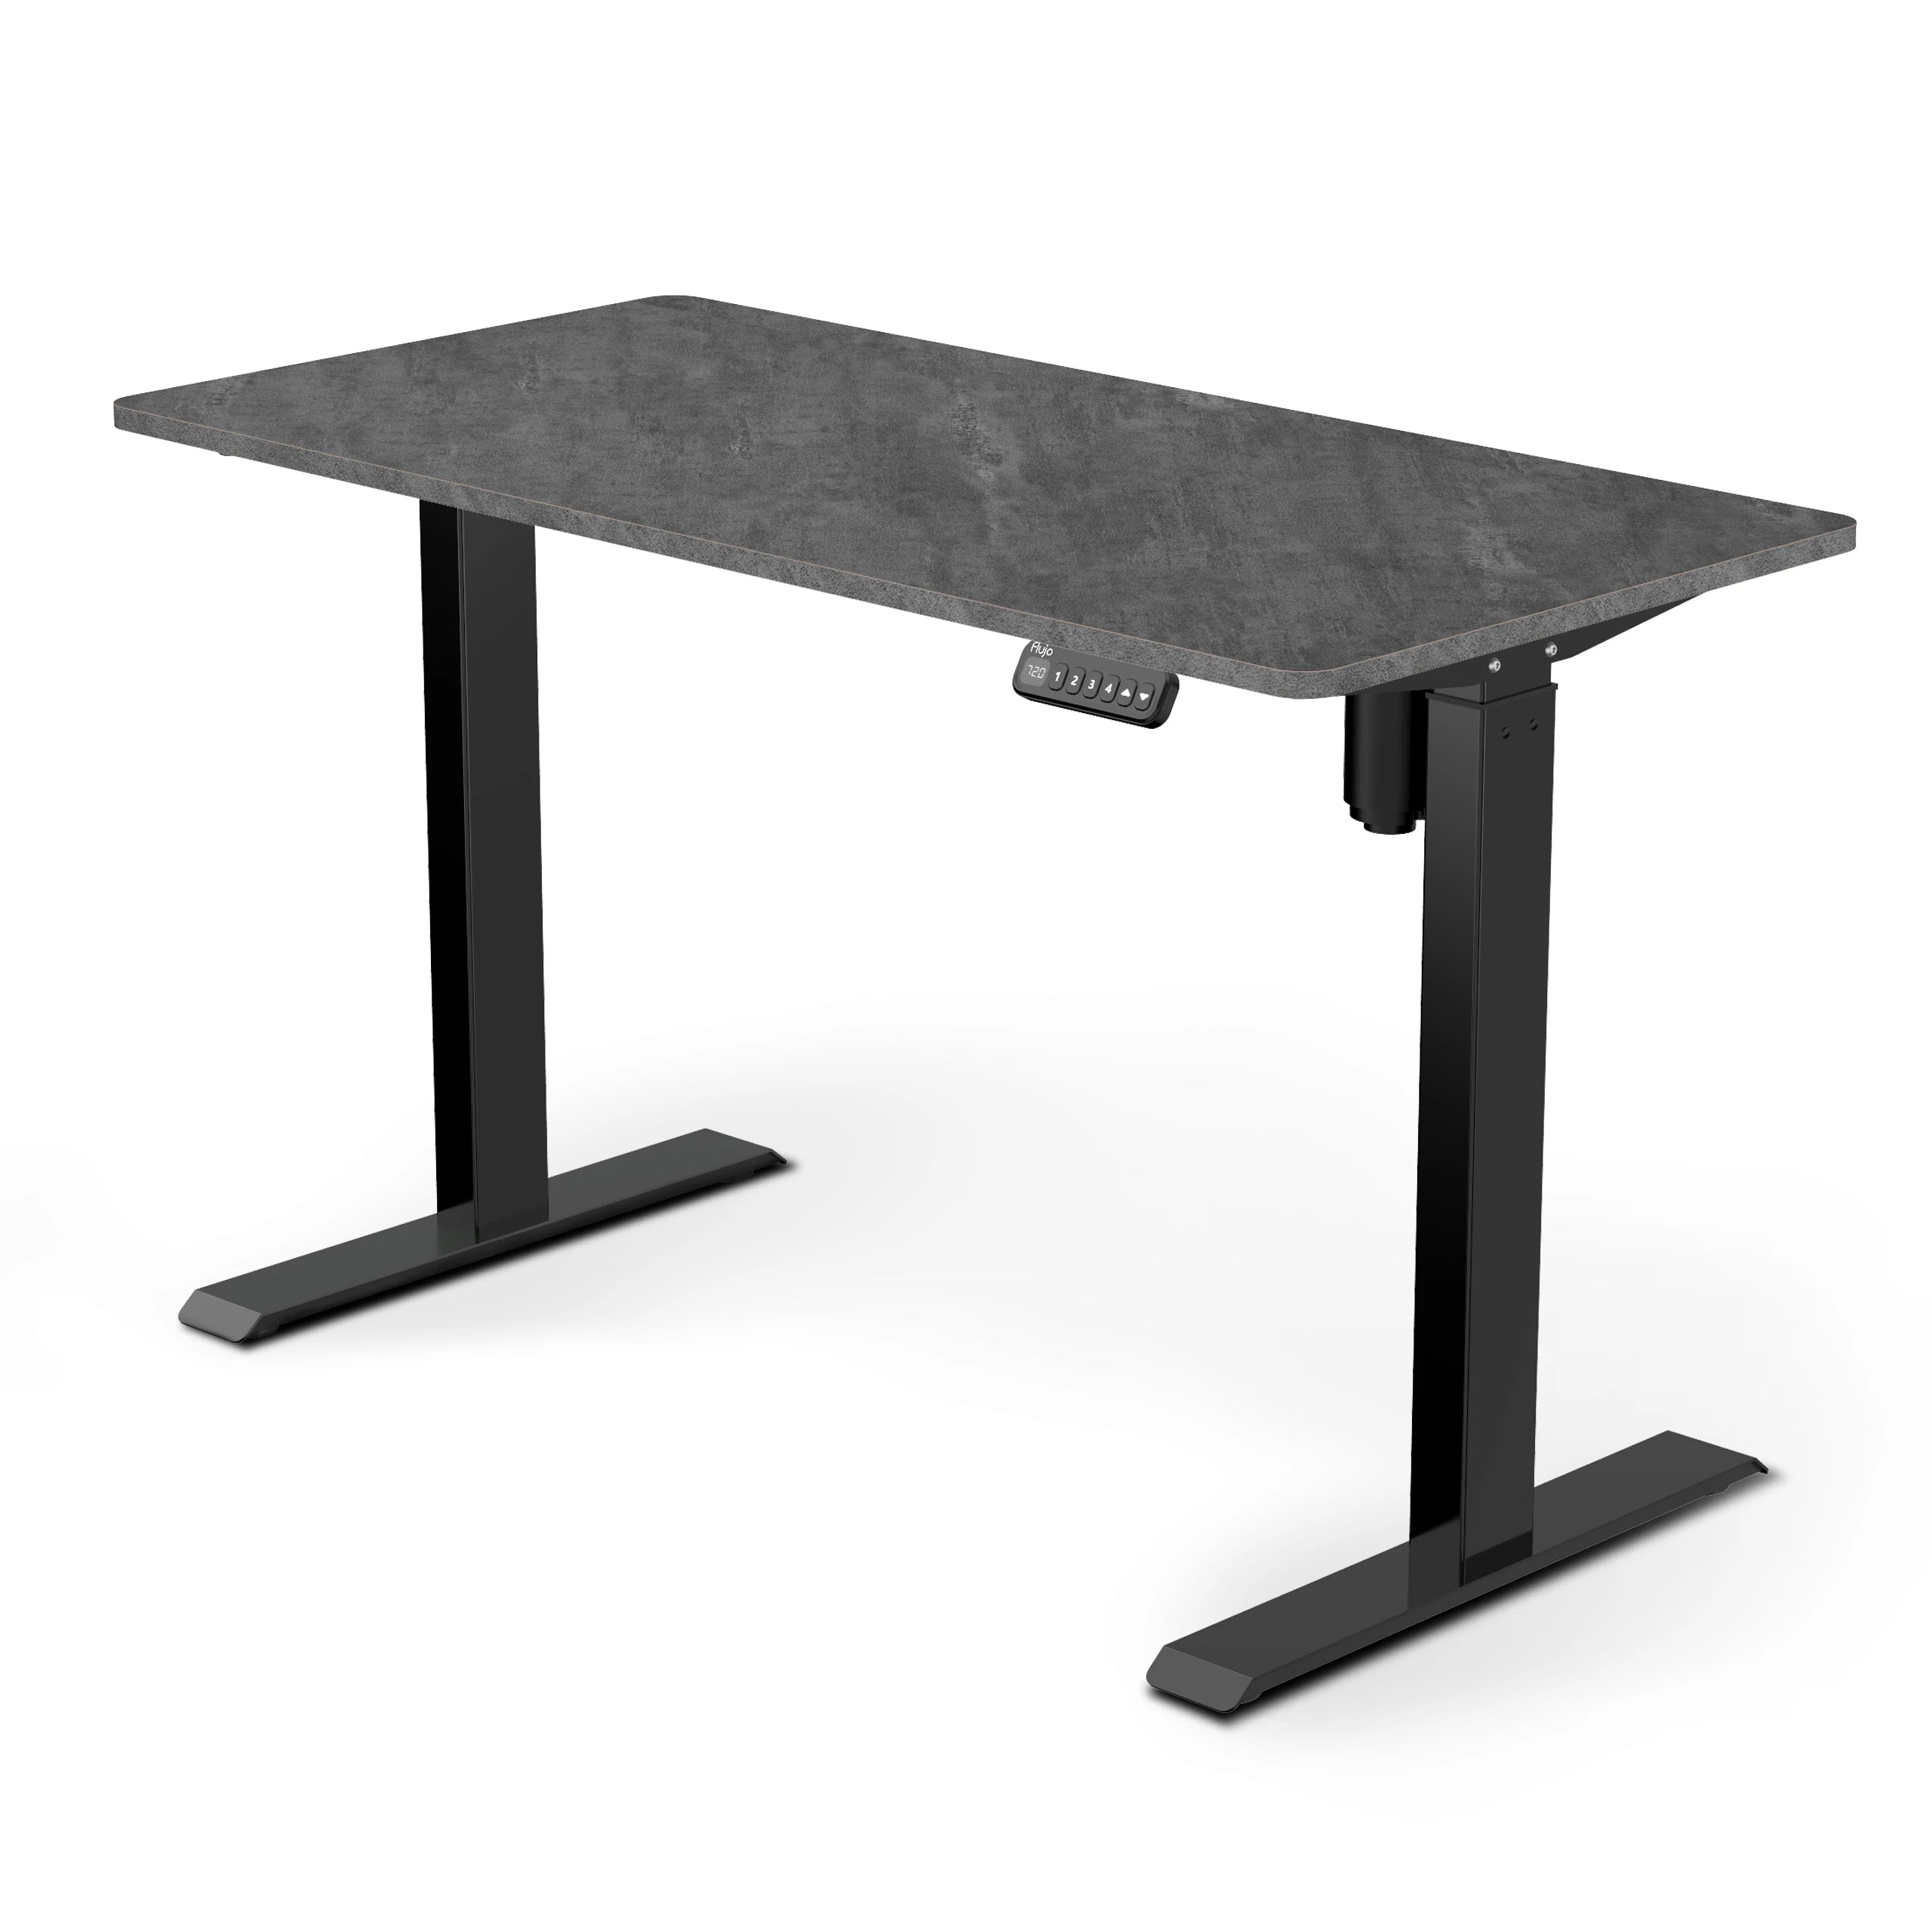 SmarTrax Ergonomic Standing Desk featuring a Rock Grey wood finish and black frame, complete with programmable height settings for a comfortable standing work experience.